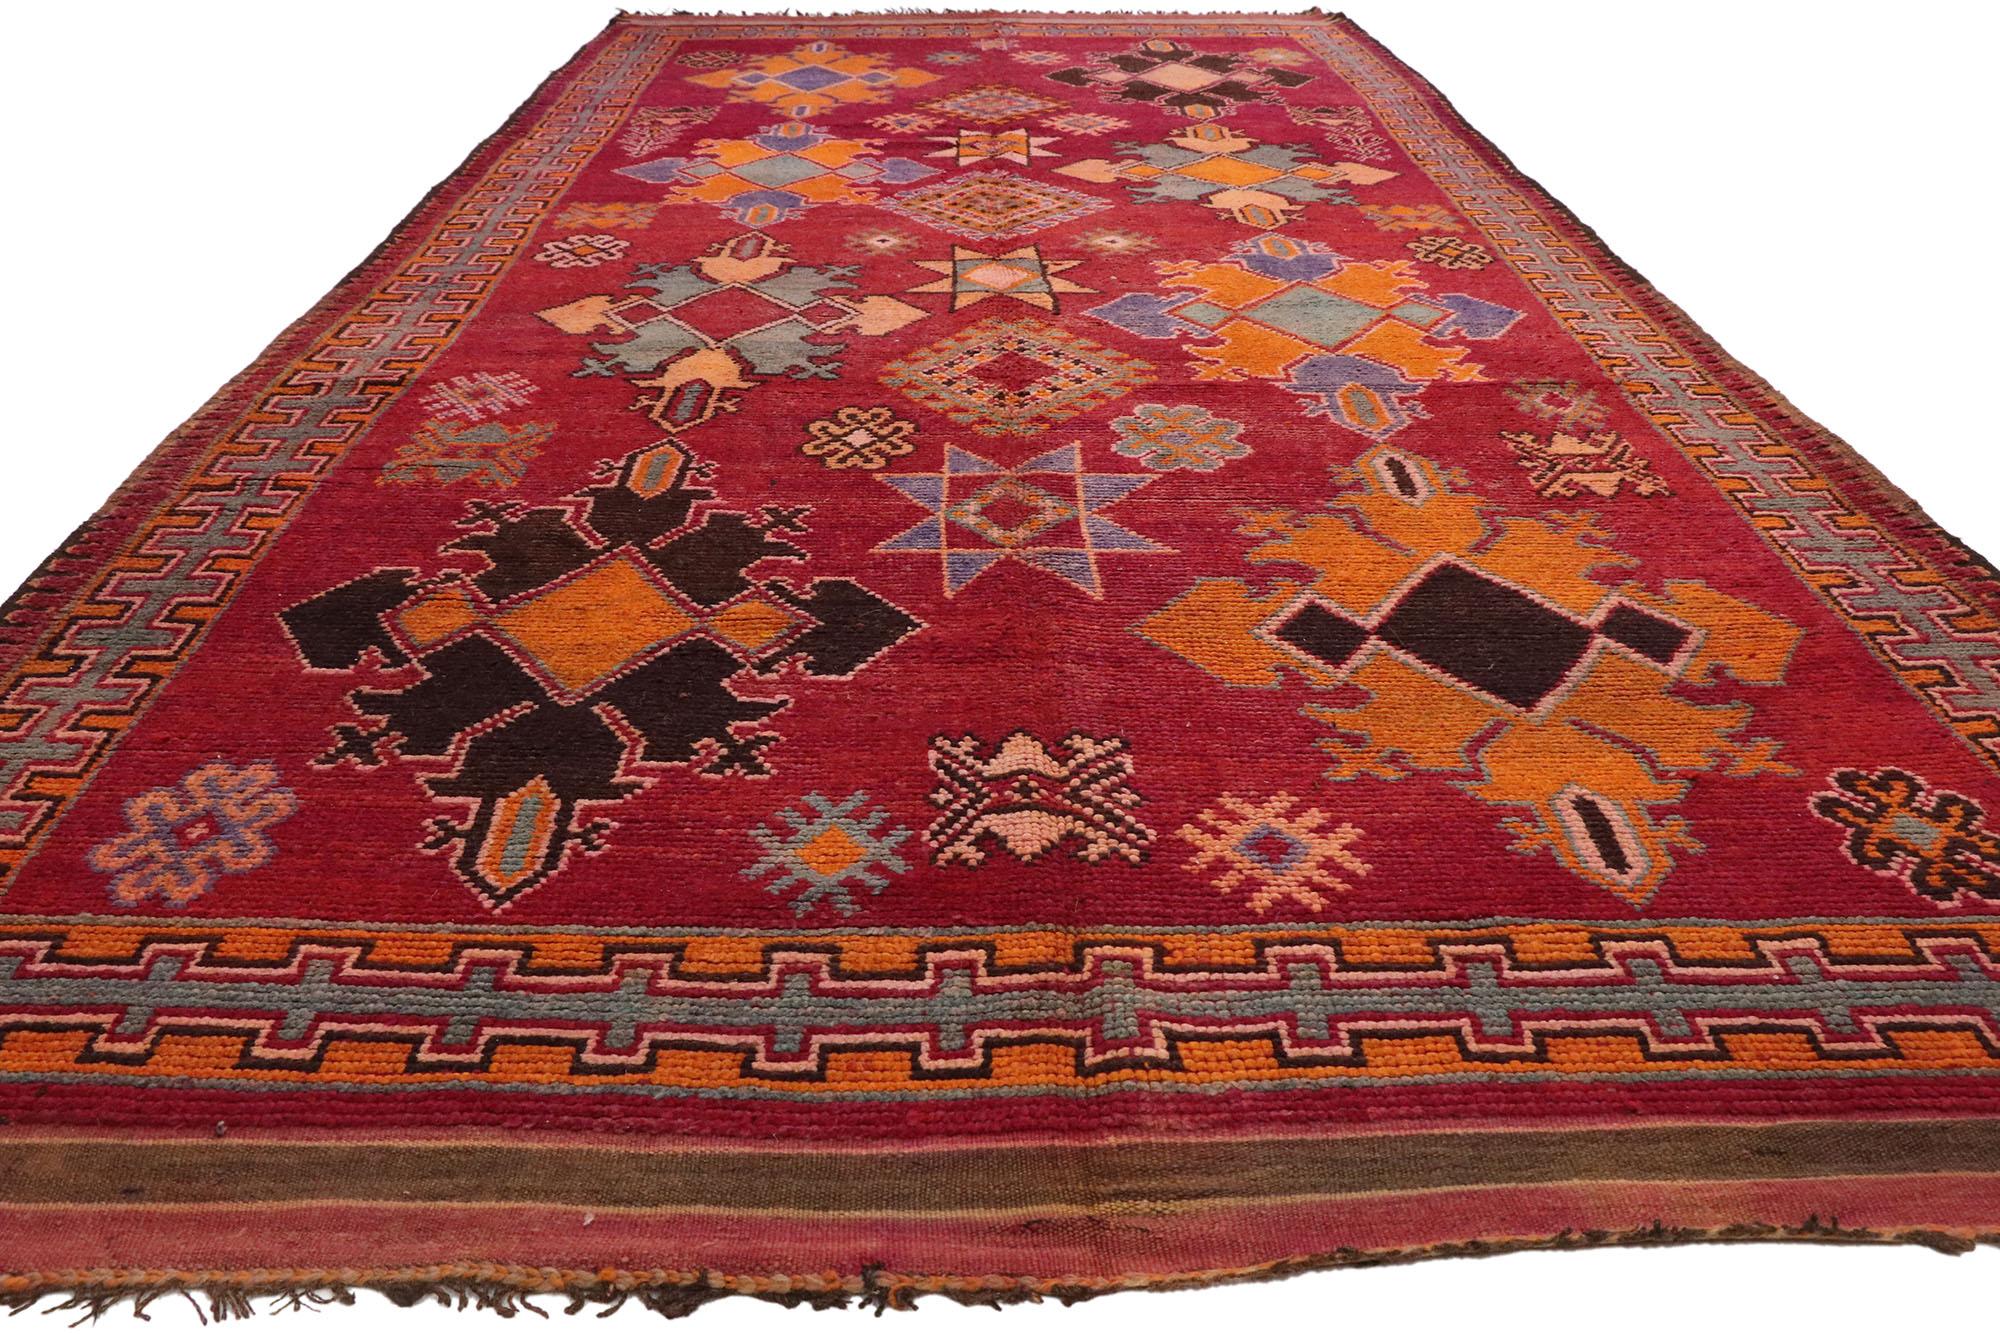 Tribal Vintage Red Boujad Moroccan Rug, Boho Chic Meets Worldly Sophistication